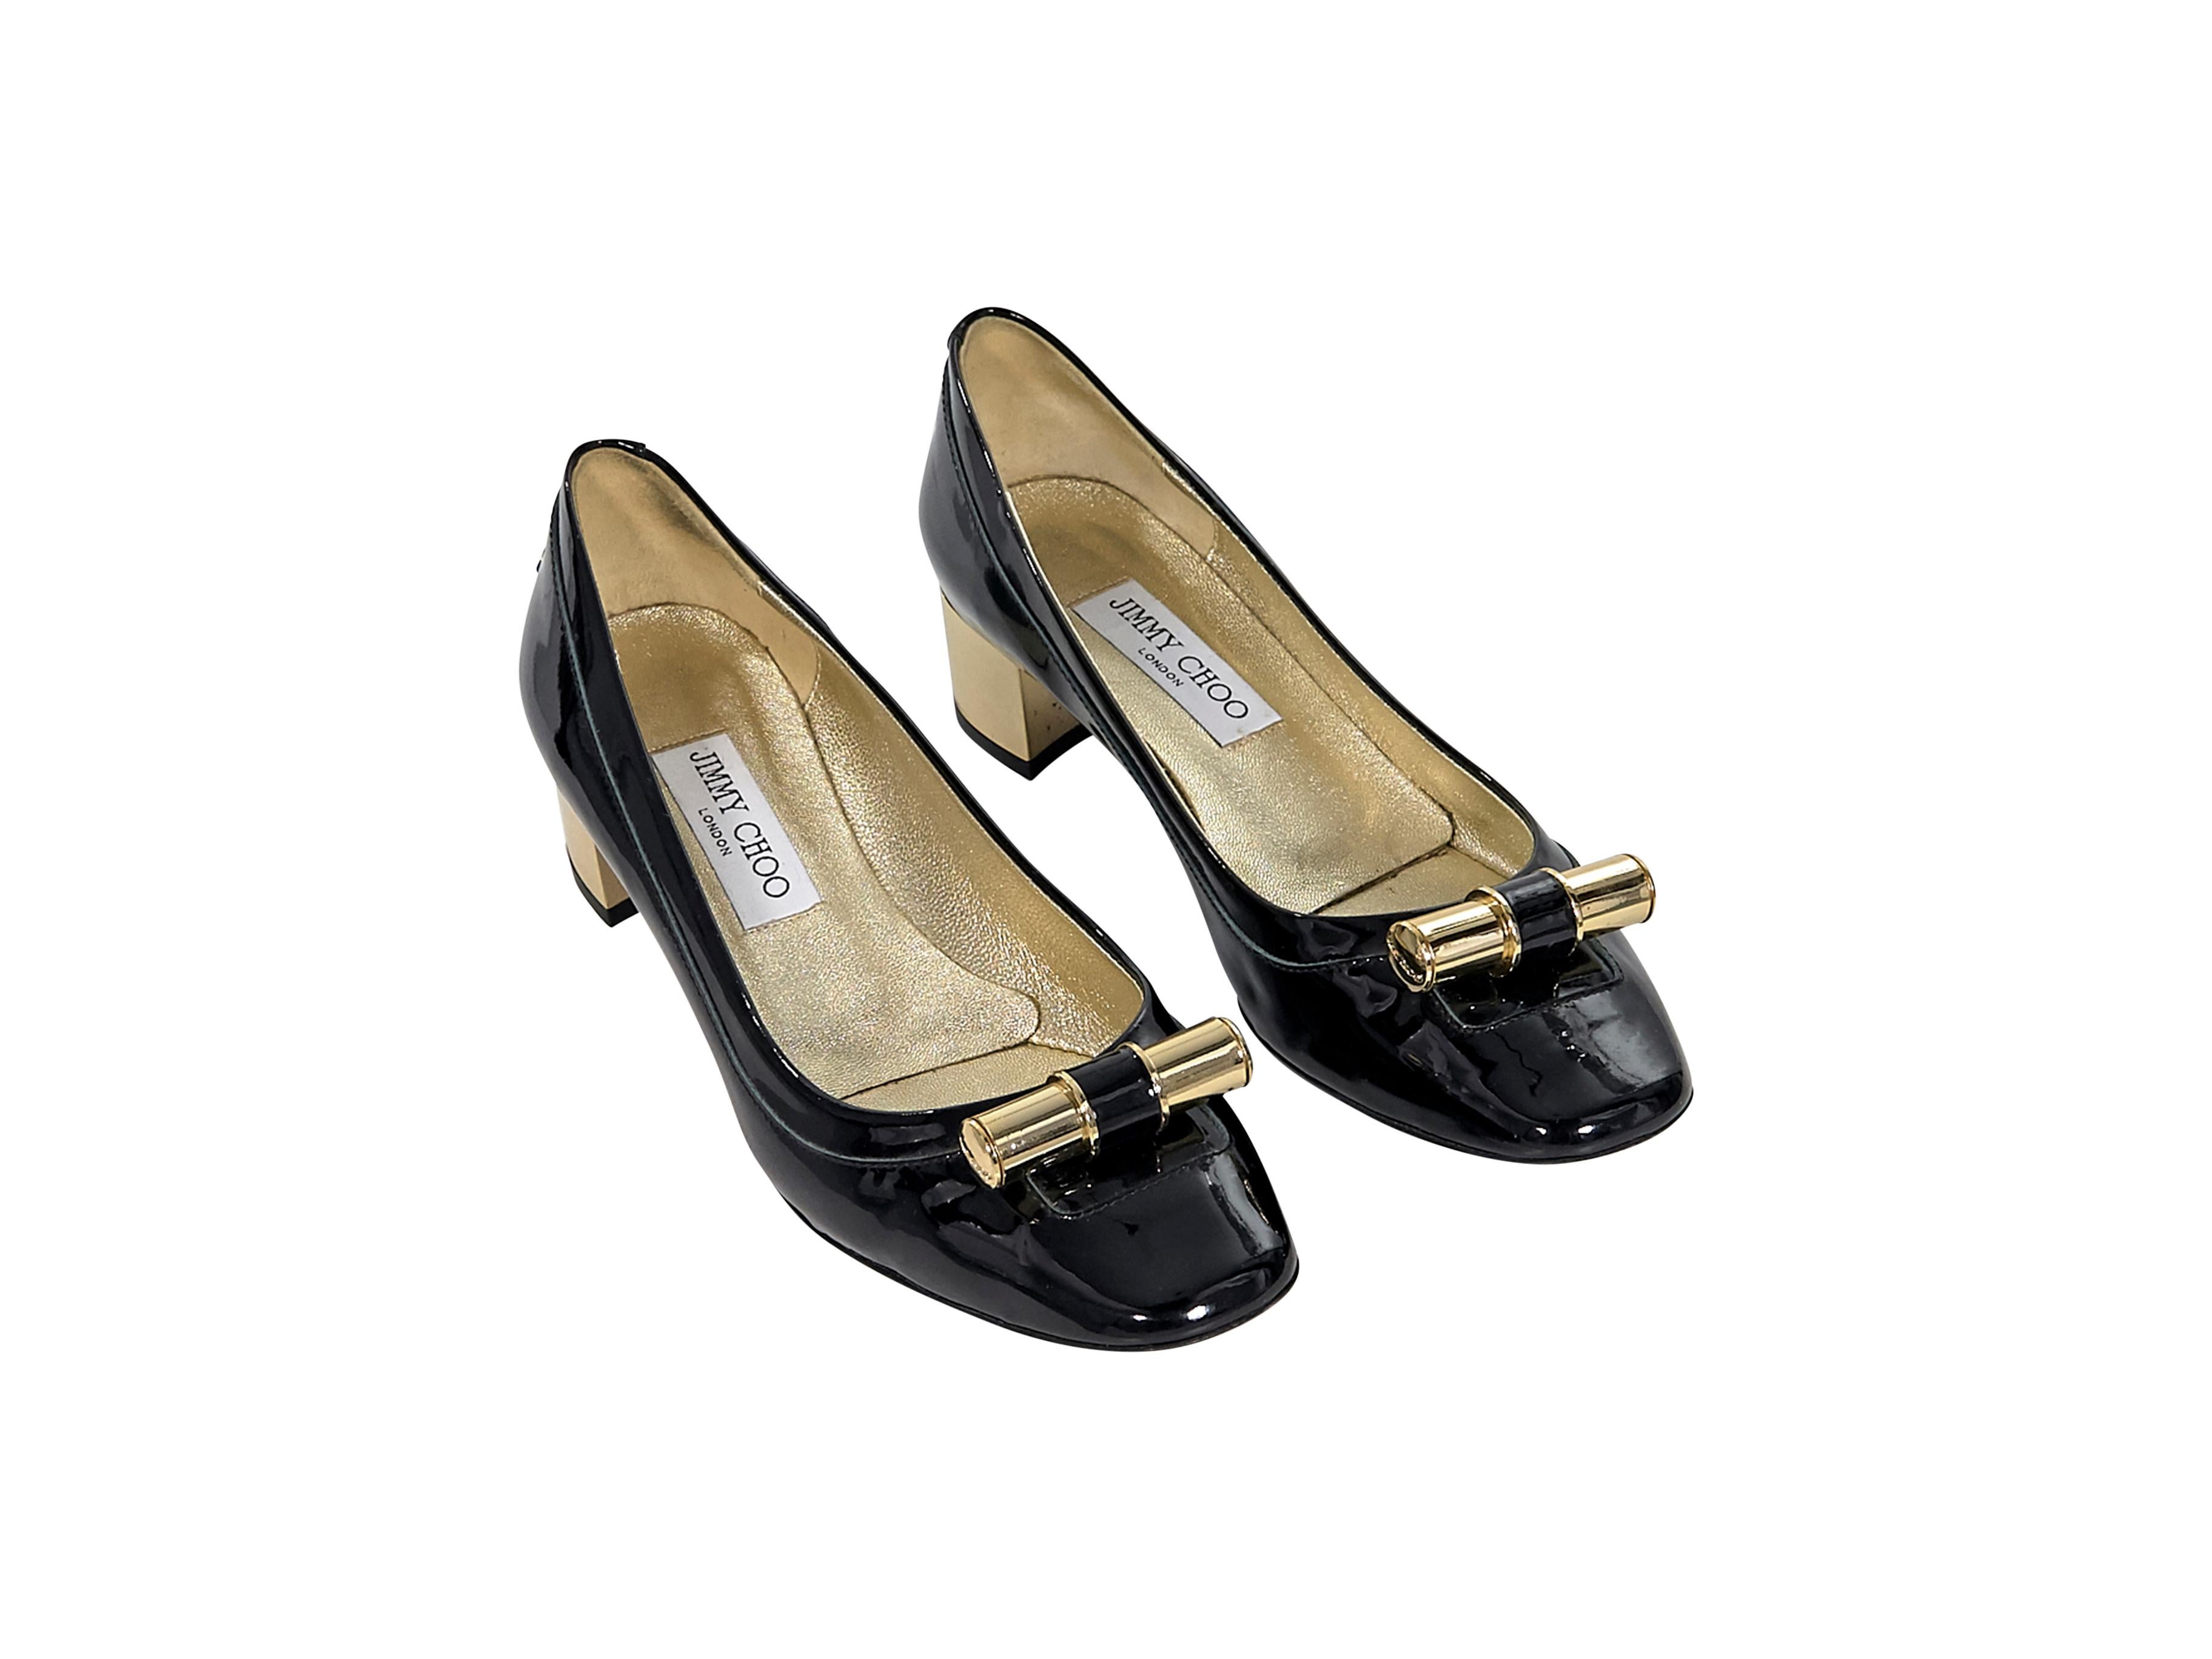 Product details:  Black patent leather kitten heels by Jimmy Choo.  Metal detail accents vamp.  Rounded square toe.  Slip-on style.  Goldtone hardware.  1.75